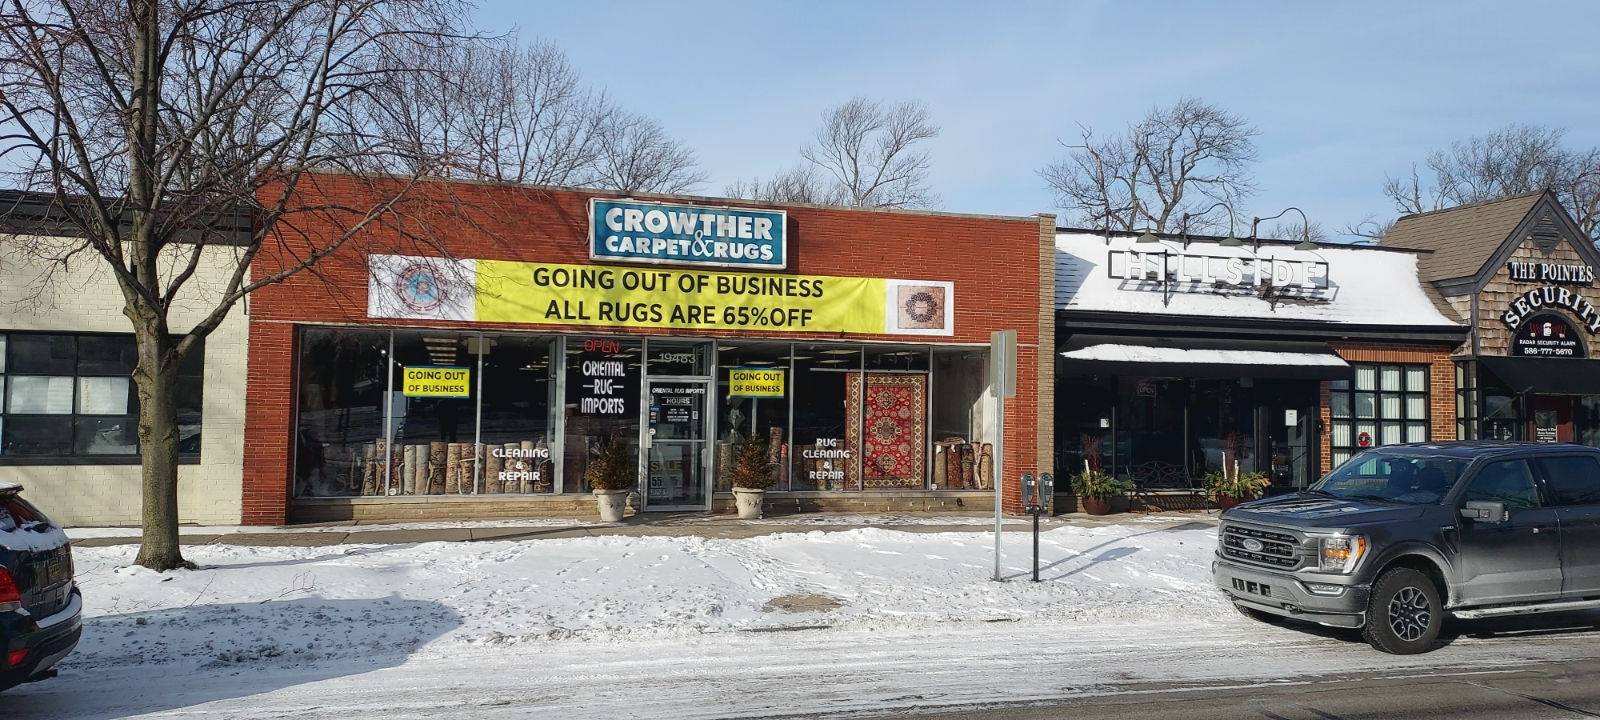 19483 Mack Ave, Grosse Pointe Woods, Michigan 48326, ,Retail,For Lease,19483 Mack Ave,1144